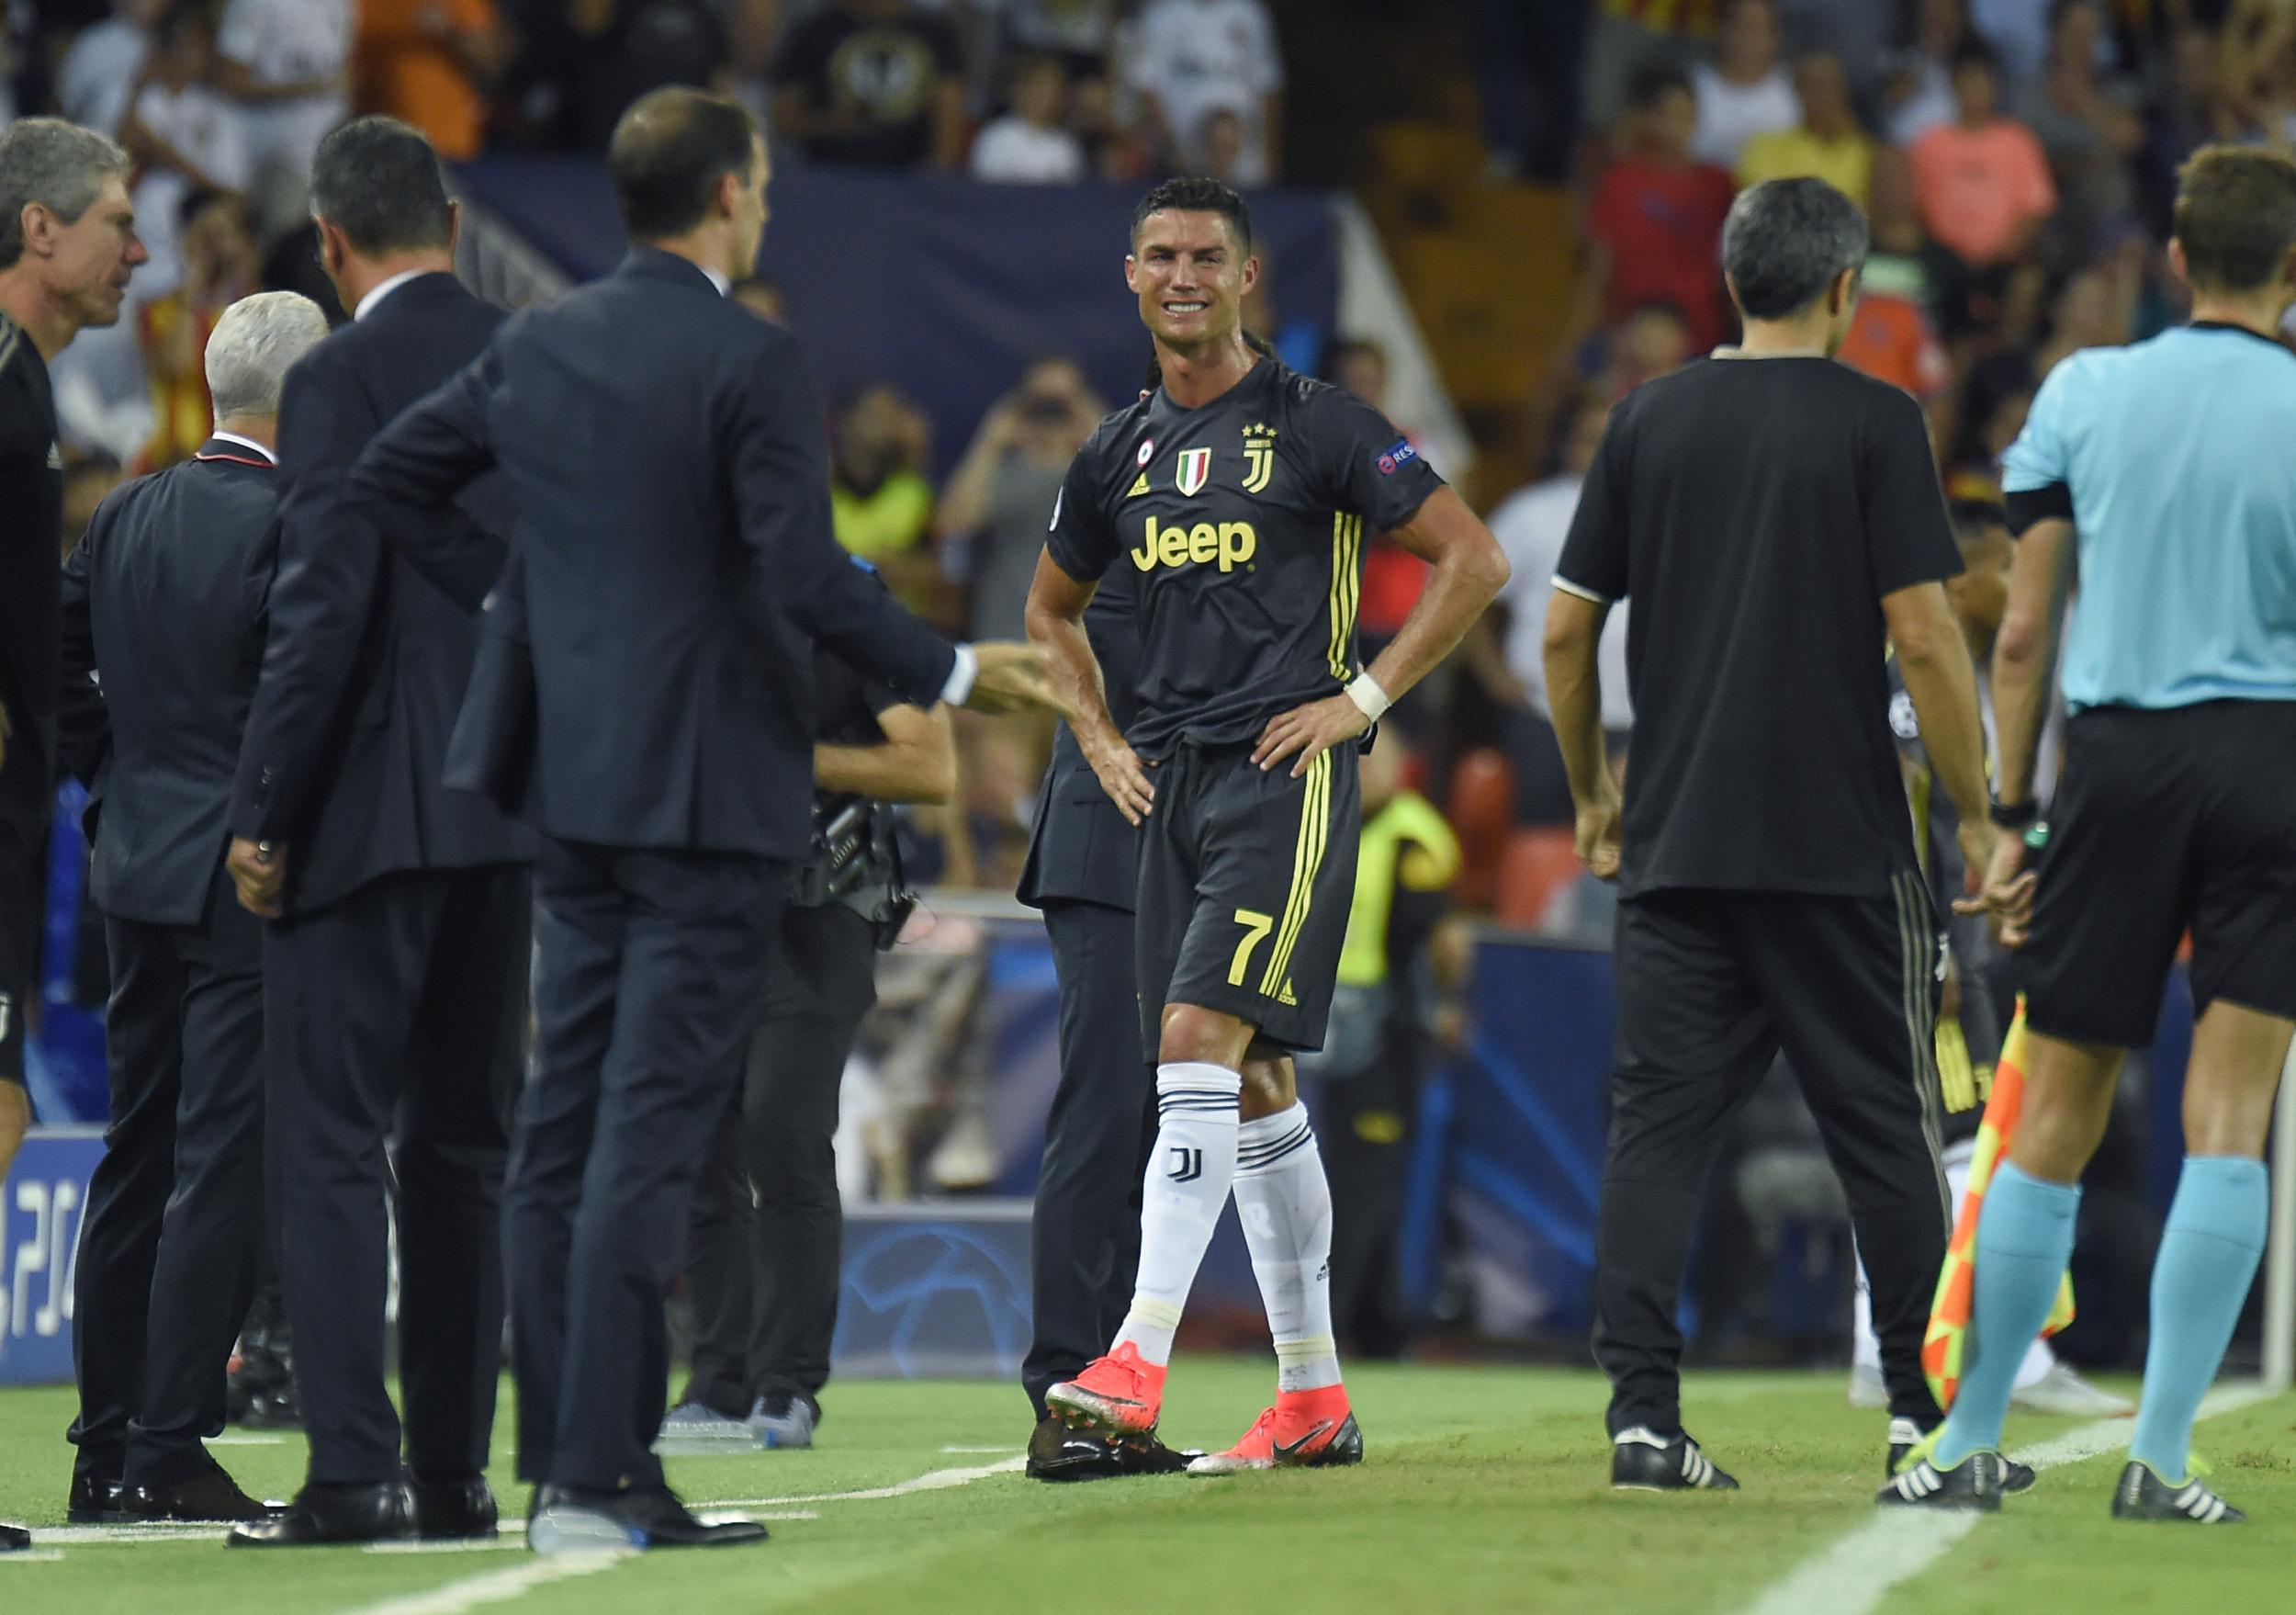 Cristiano Ronaldo cries after receiving a red card against Valencia